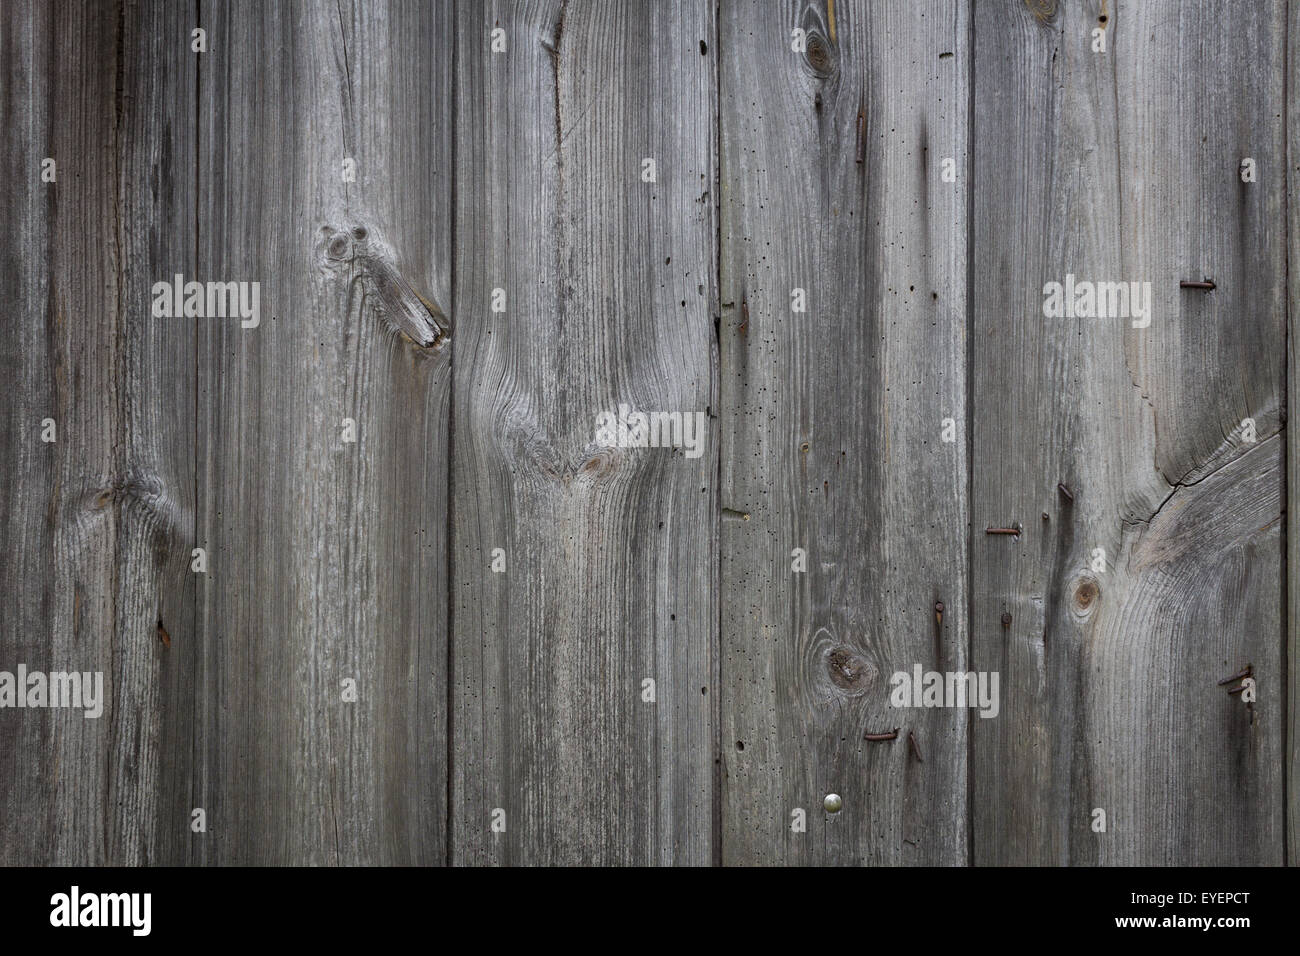 vintage wood background, wooden texture Stock Photo